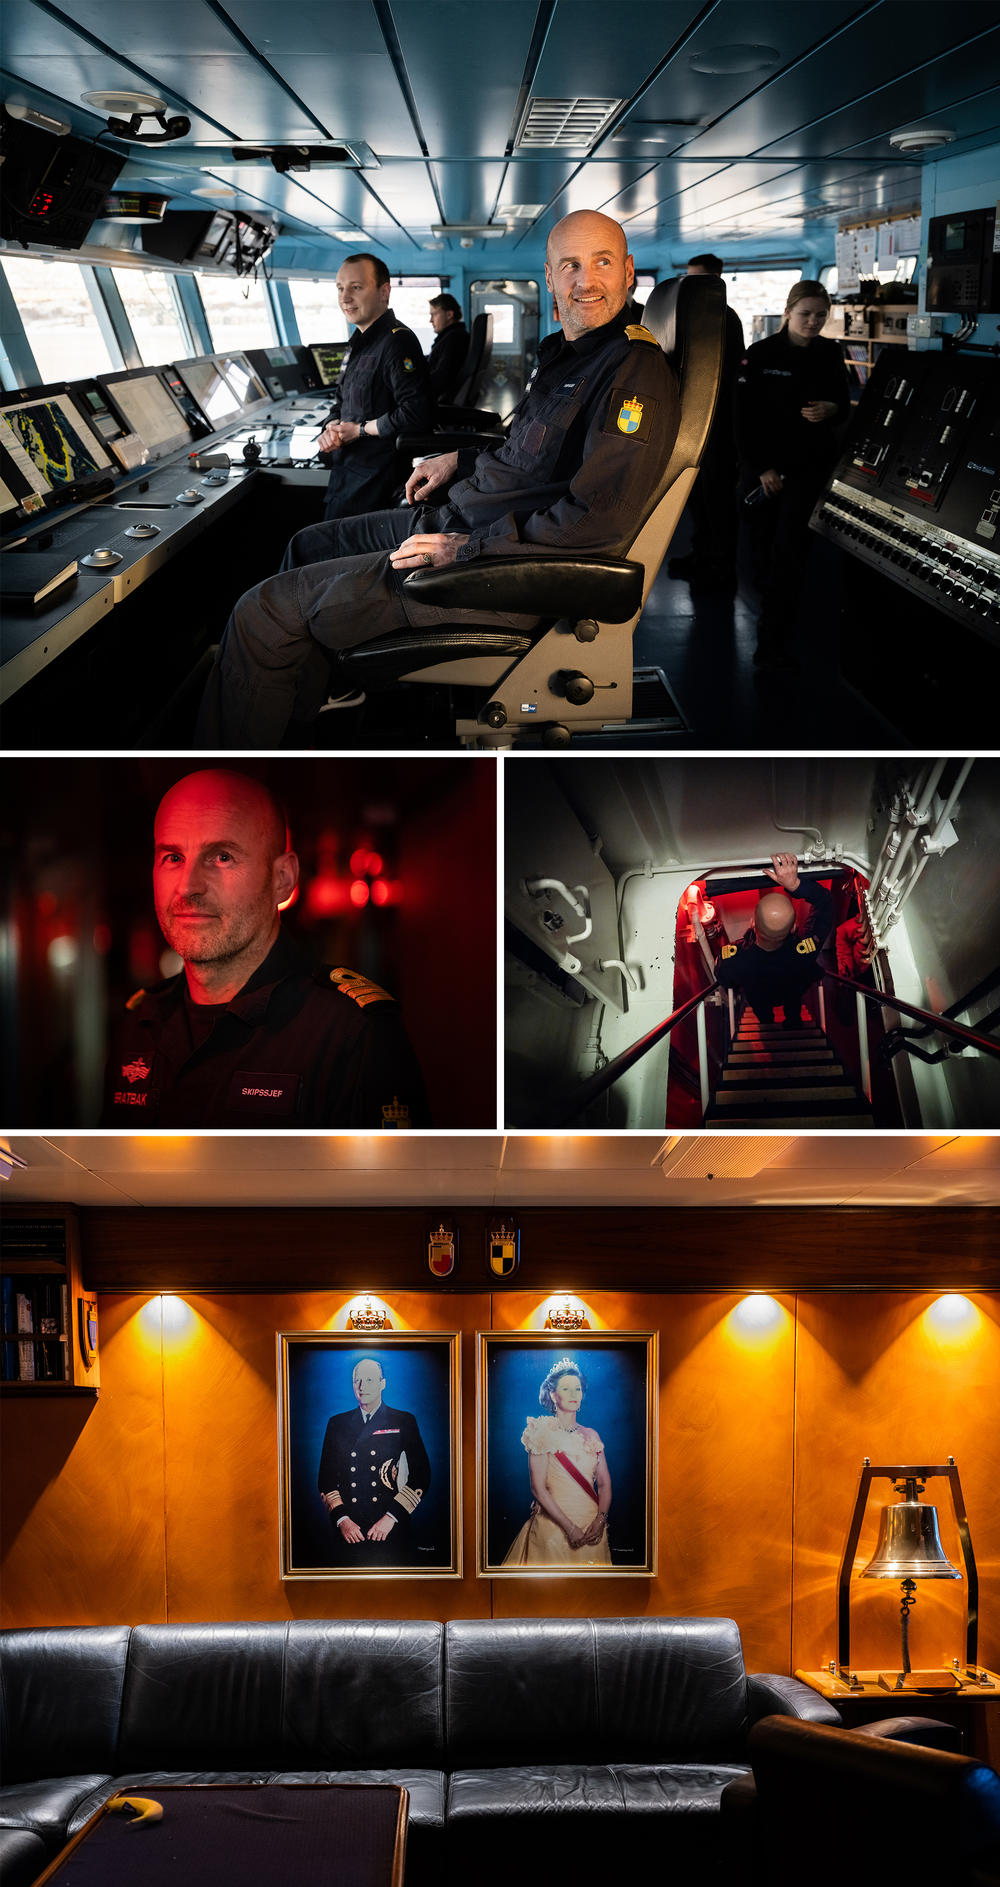 Capt. Pal Bratbak has been patrolling the Barents Sea for decades in a Norwegian coast guard search and rescue cutter.